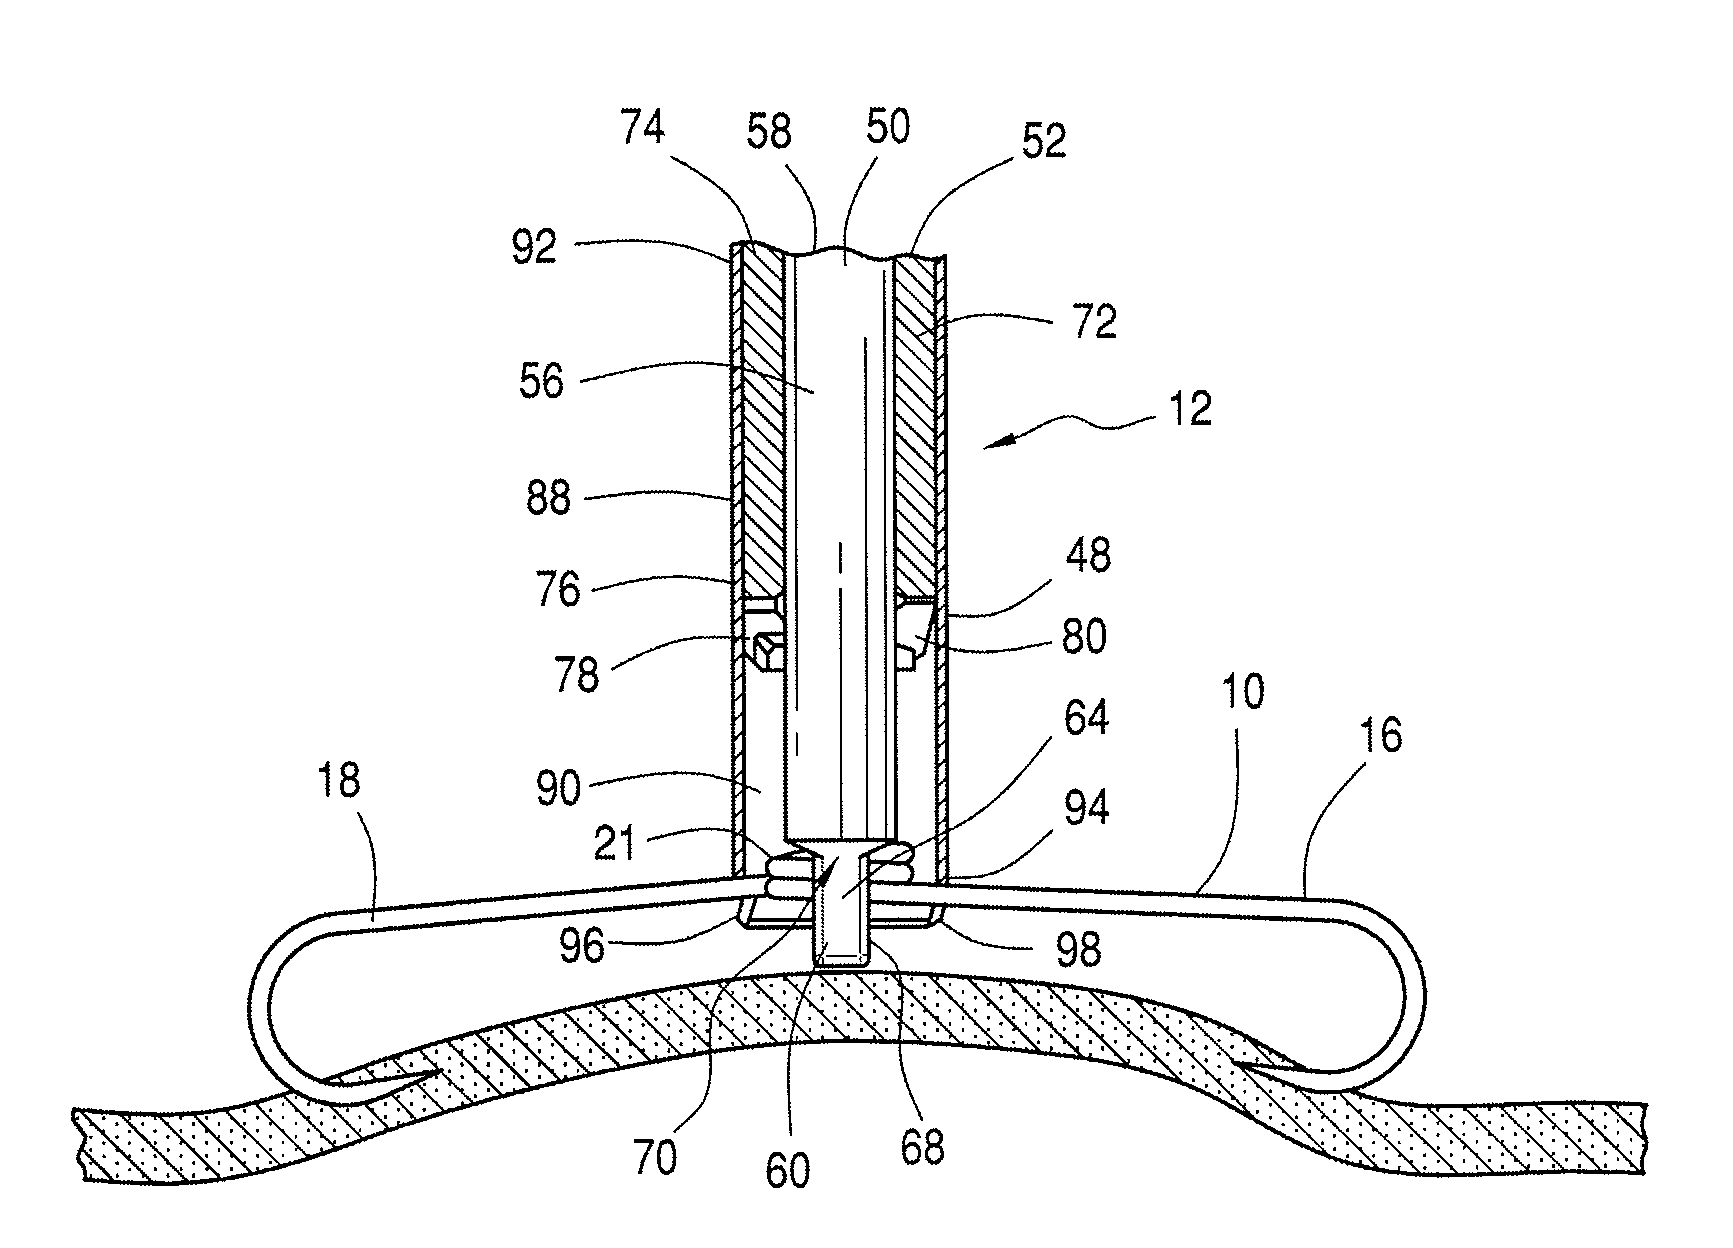 Clip and delivery assembly used in forming a tissue fold